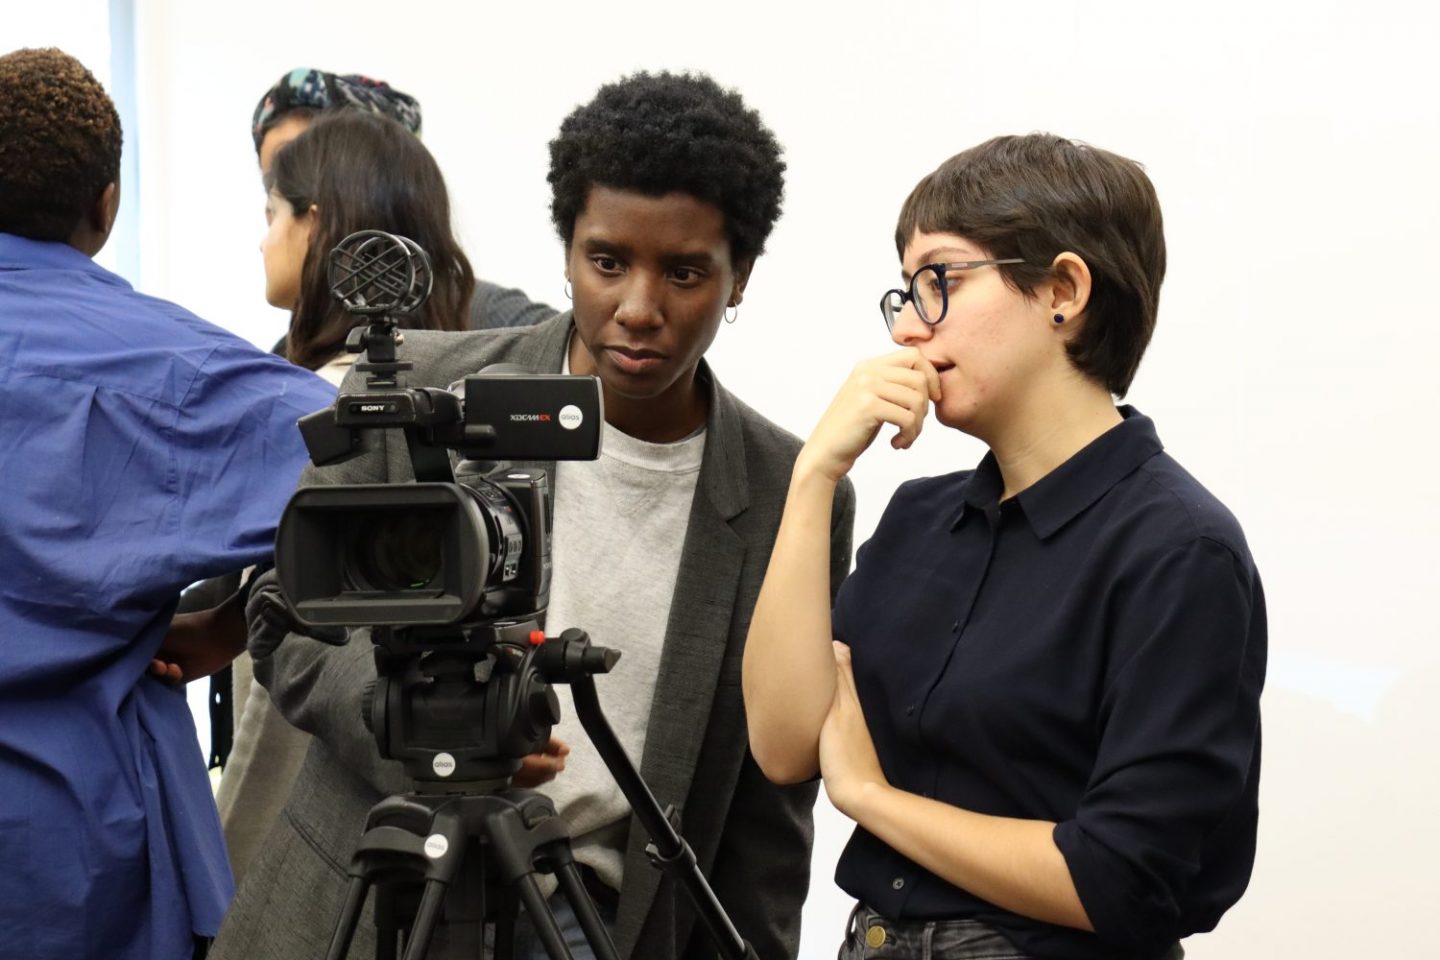 Two REcreative film school students working with a professional camera